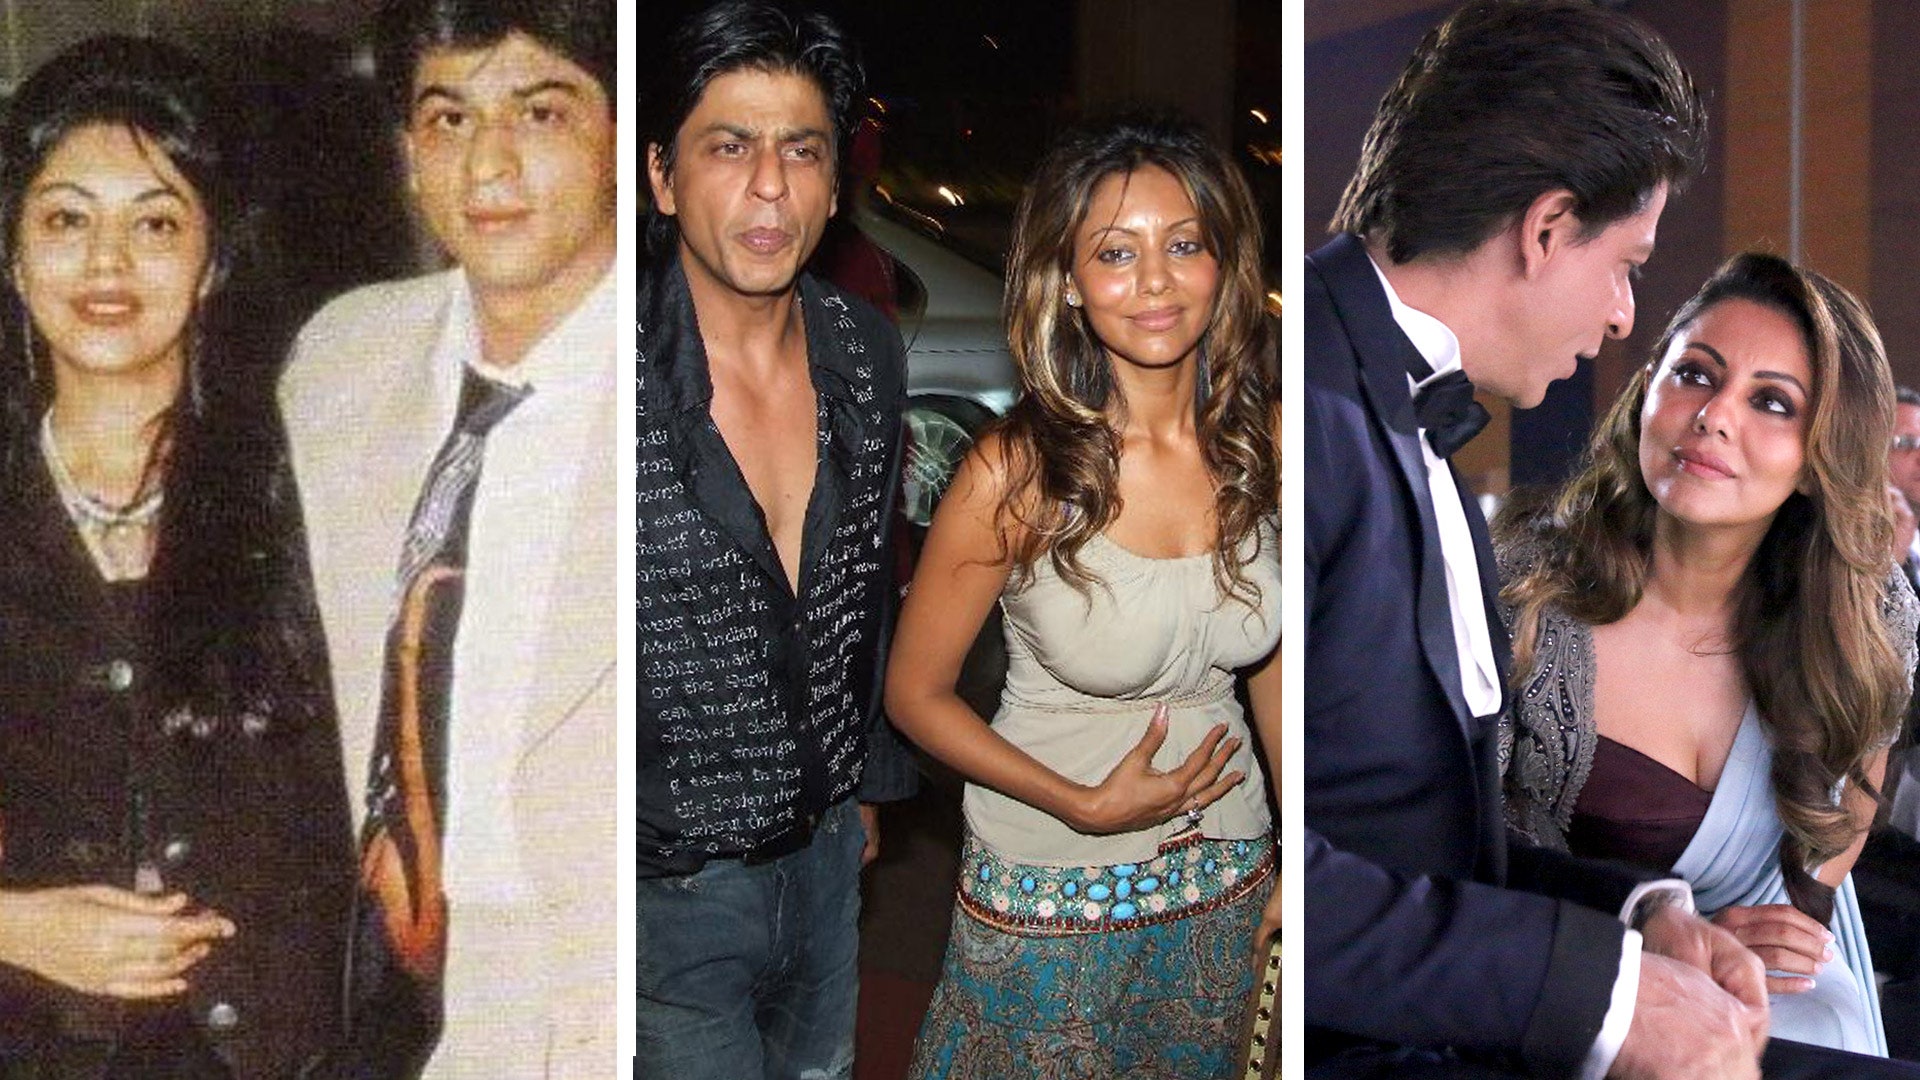 Top 5 Inter-caste marriage of Bollywood | Celebrity couples who loved beyond religion  